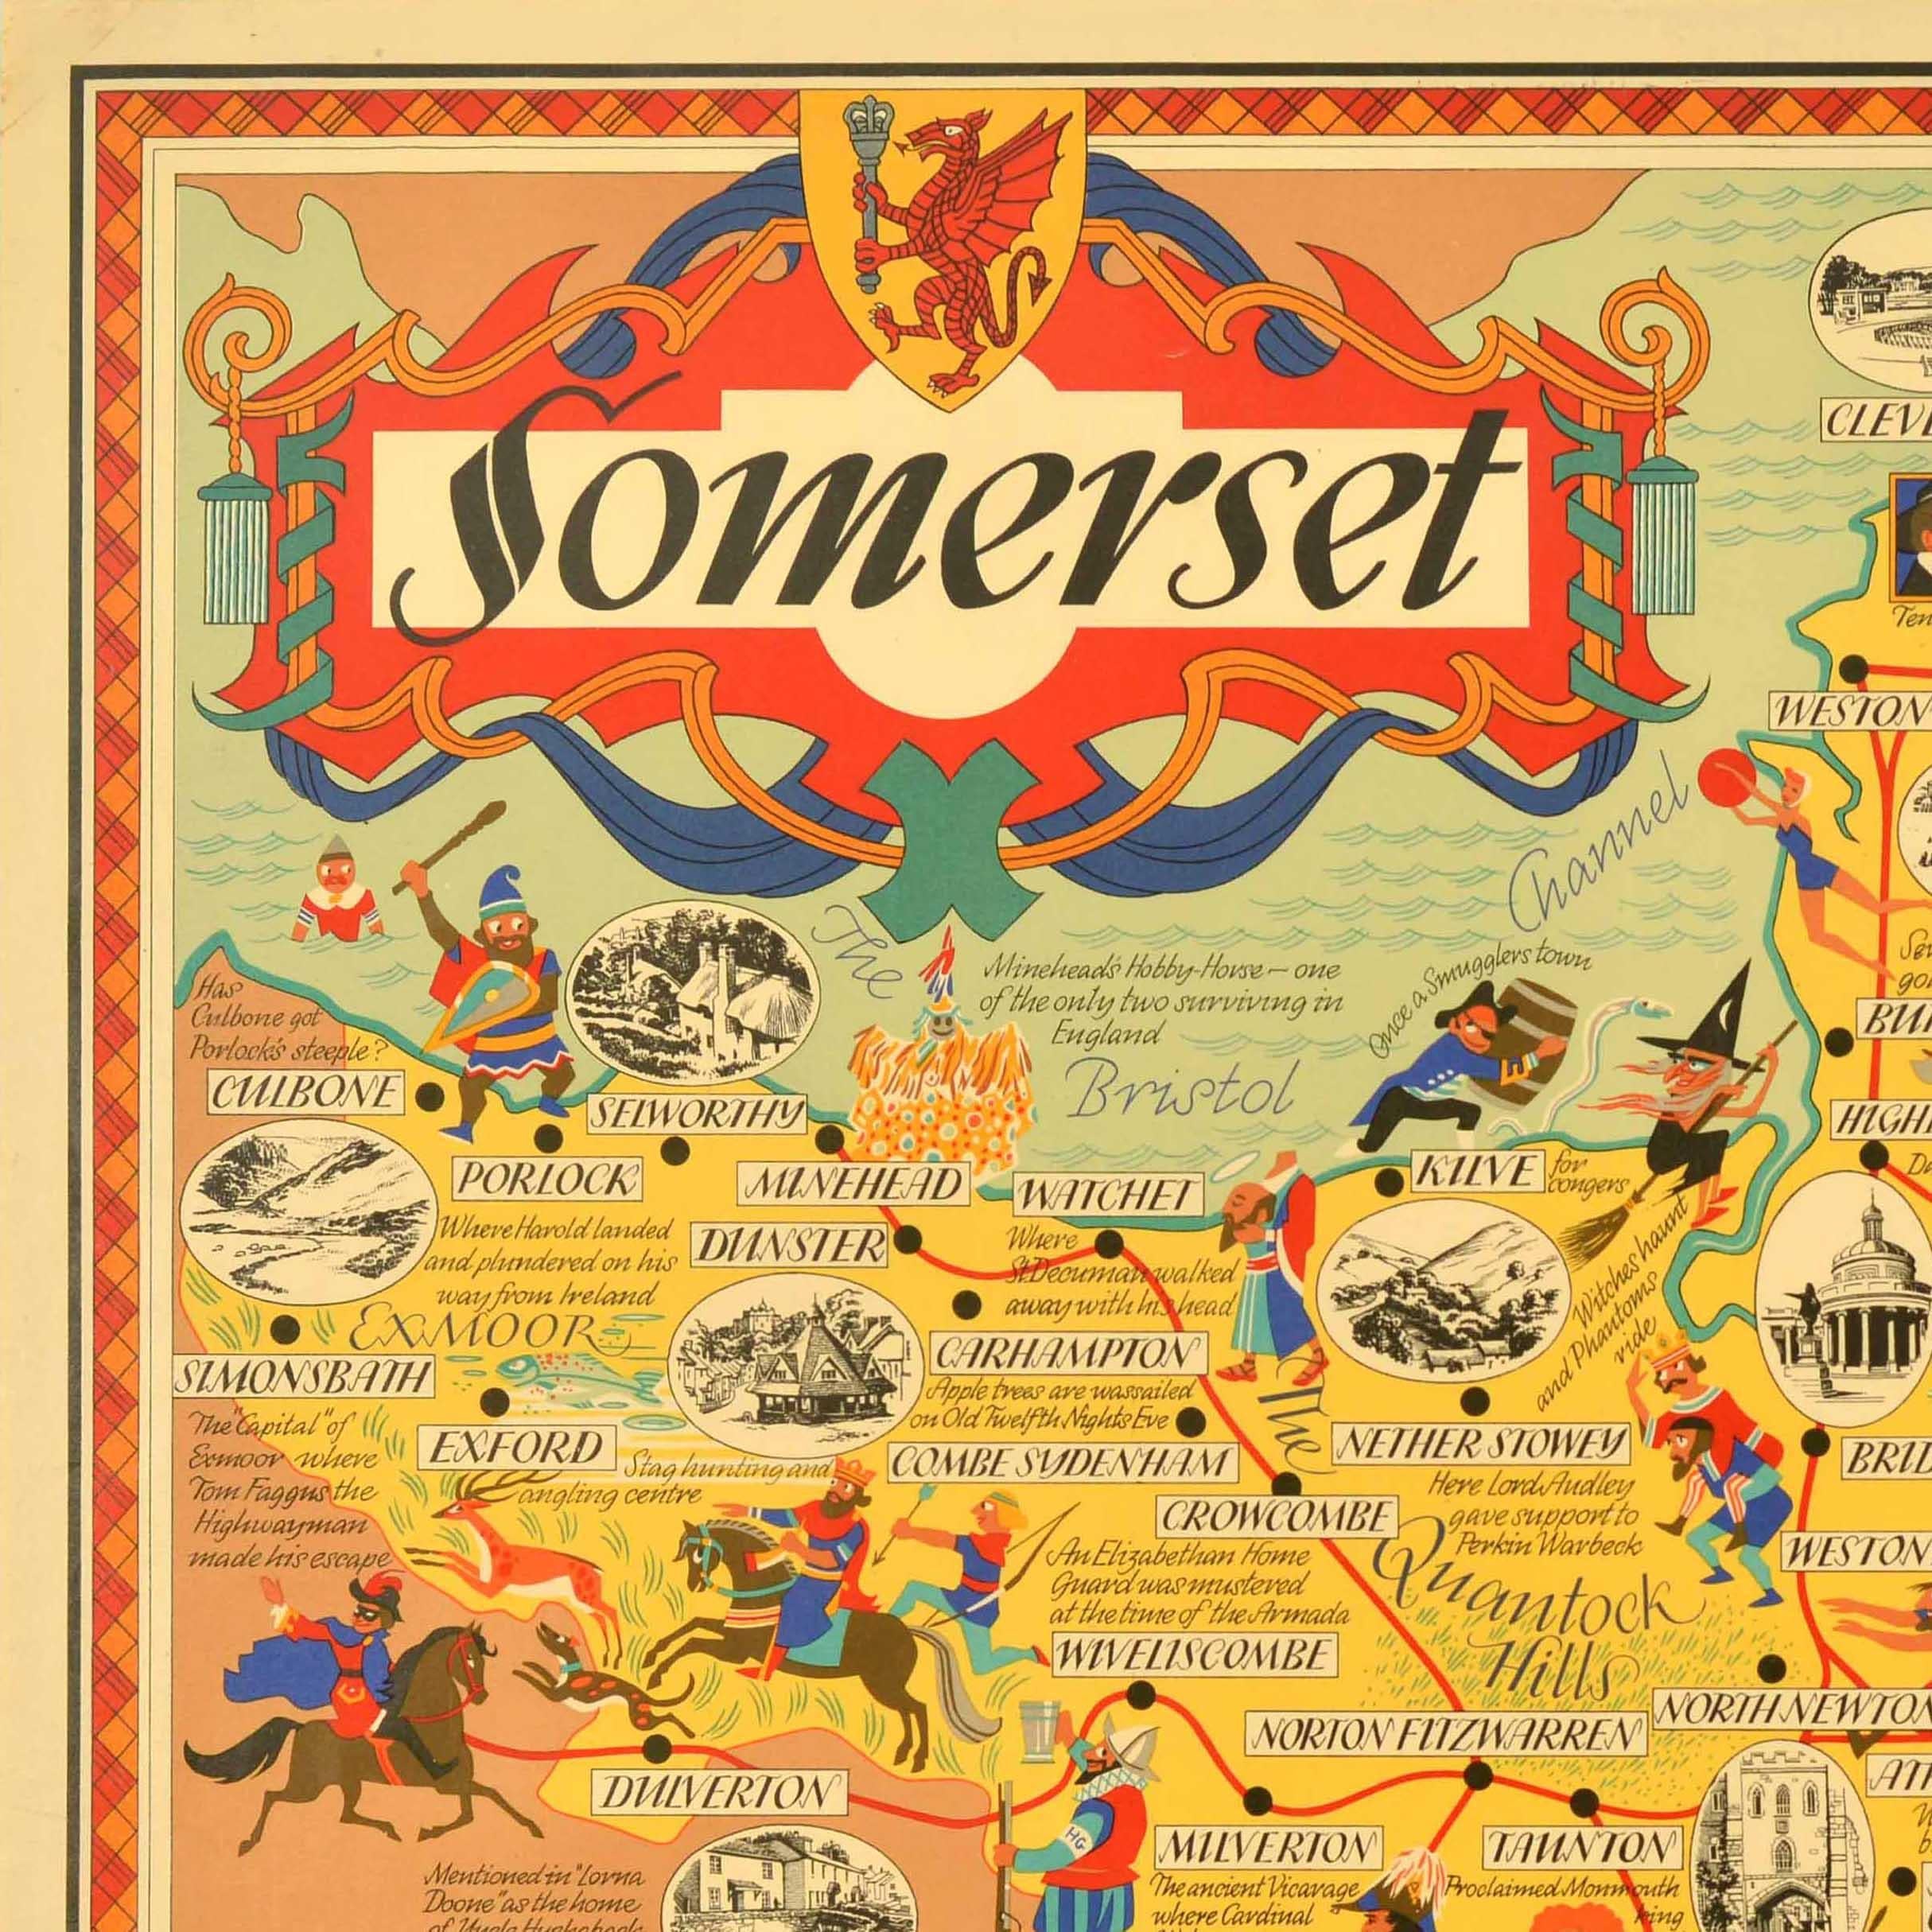 Original vintage British Railways poster for Somerset in South West England featuring a fun and colourful pictorial map with illustrations and descriptions of ancient myths and legends, traditions and nursery rhyme characters, notable people and